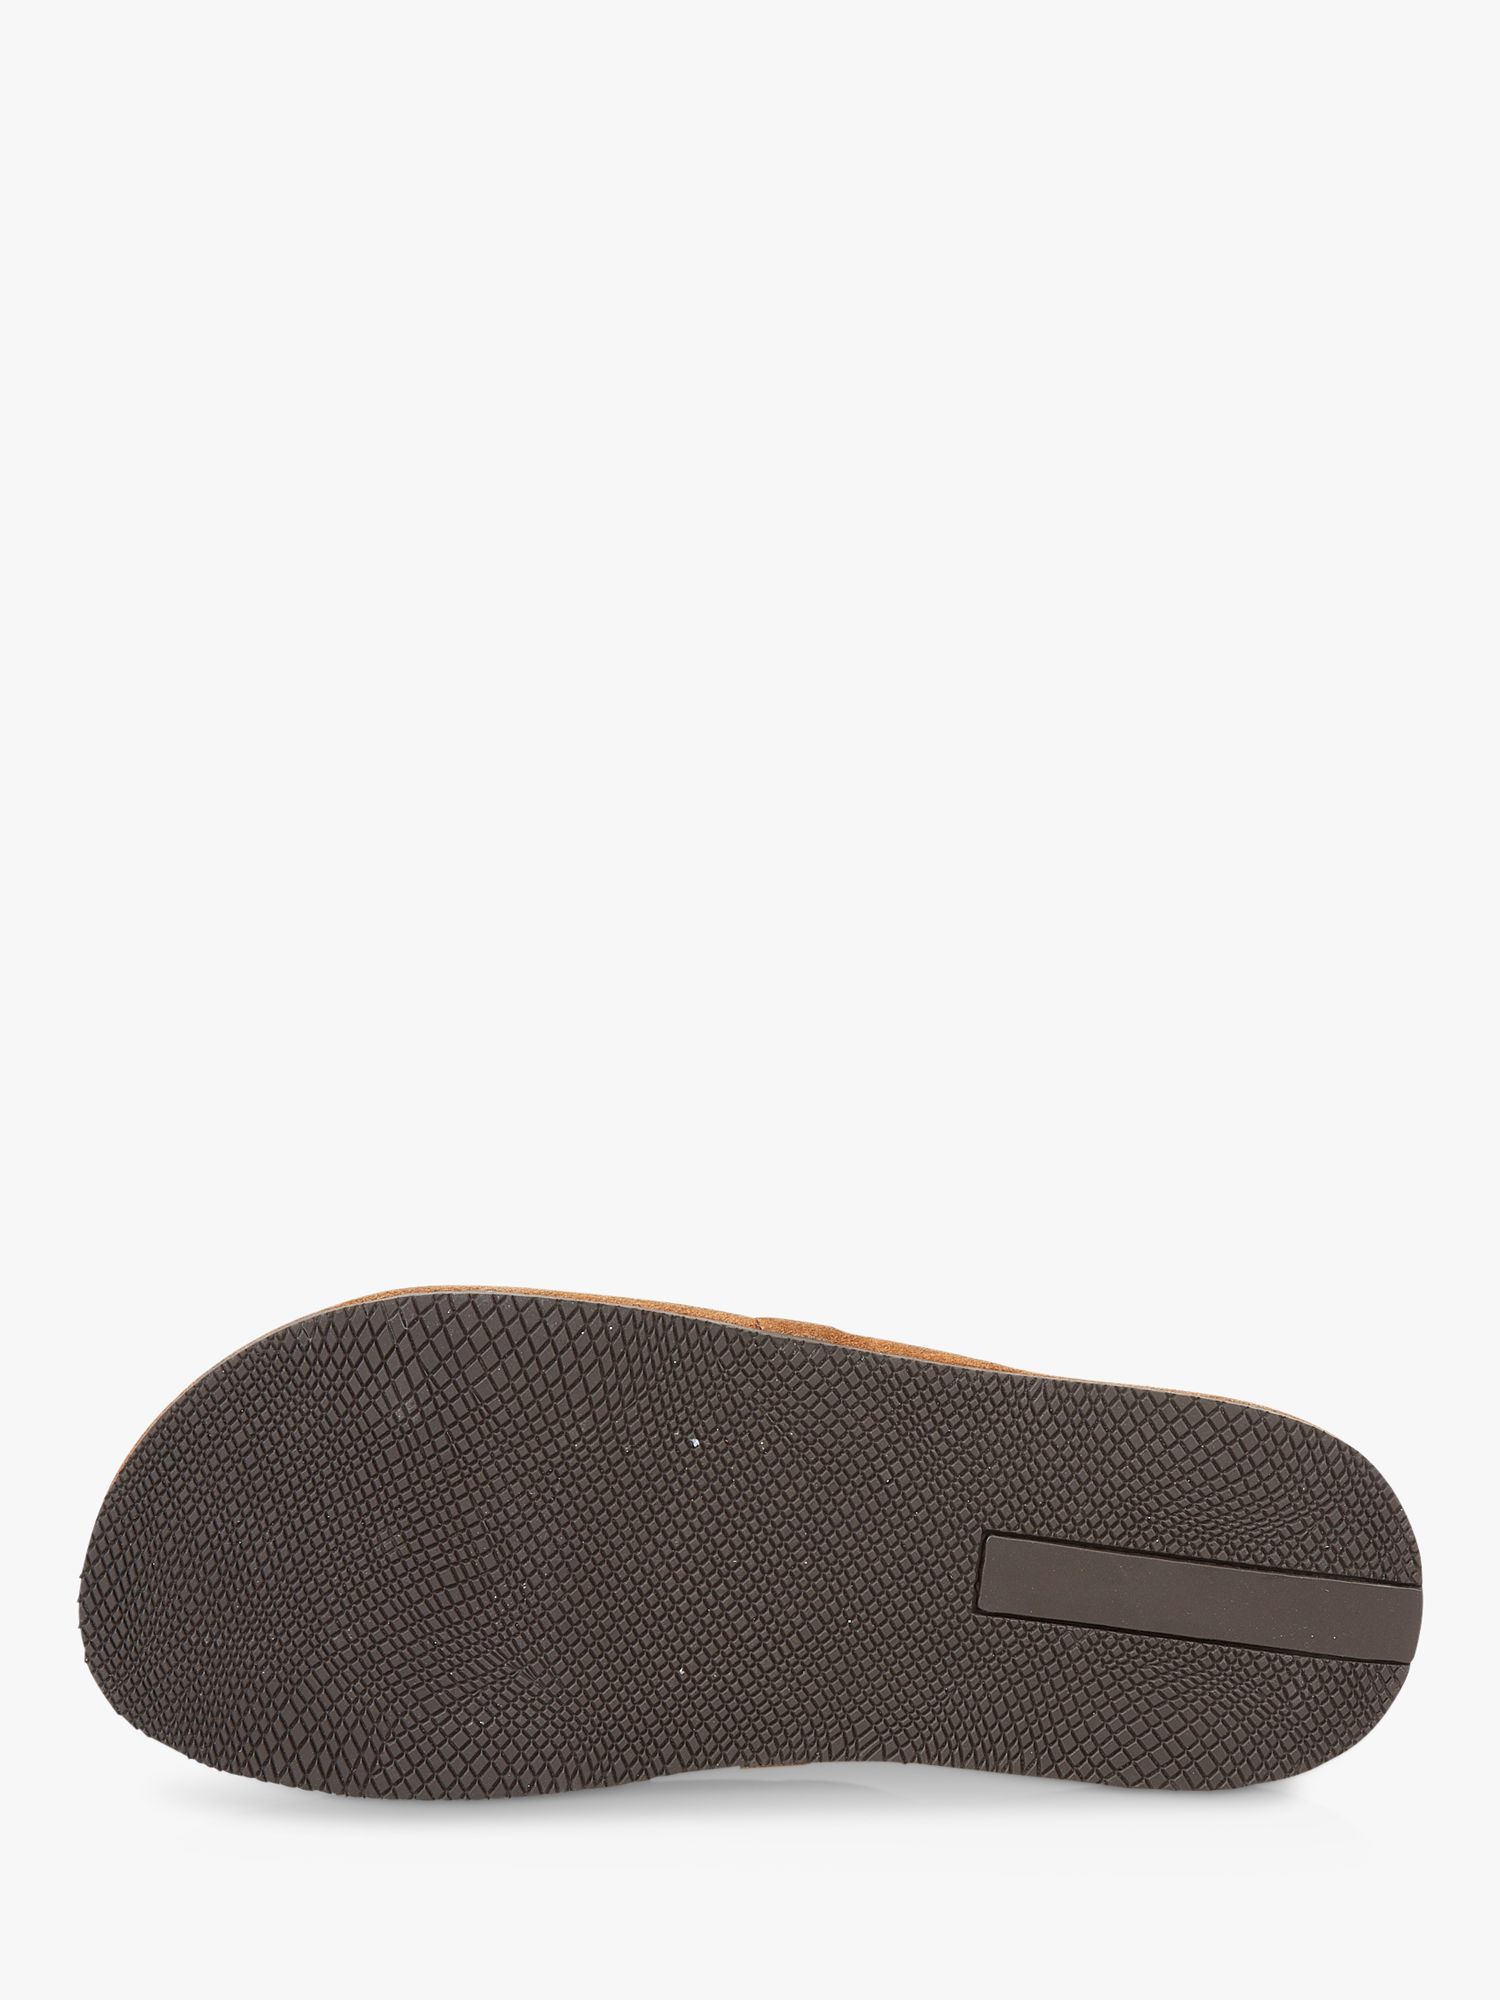 Buy Silver Street London Smithfield Suede Slippers Online at johnlewis.com